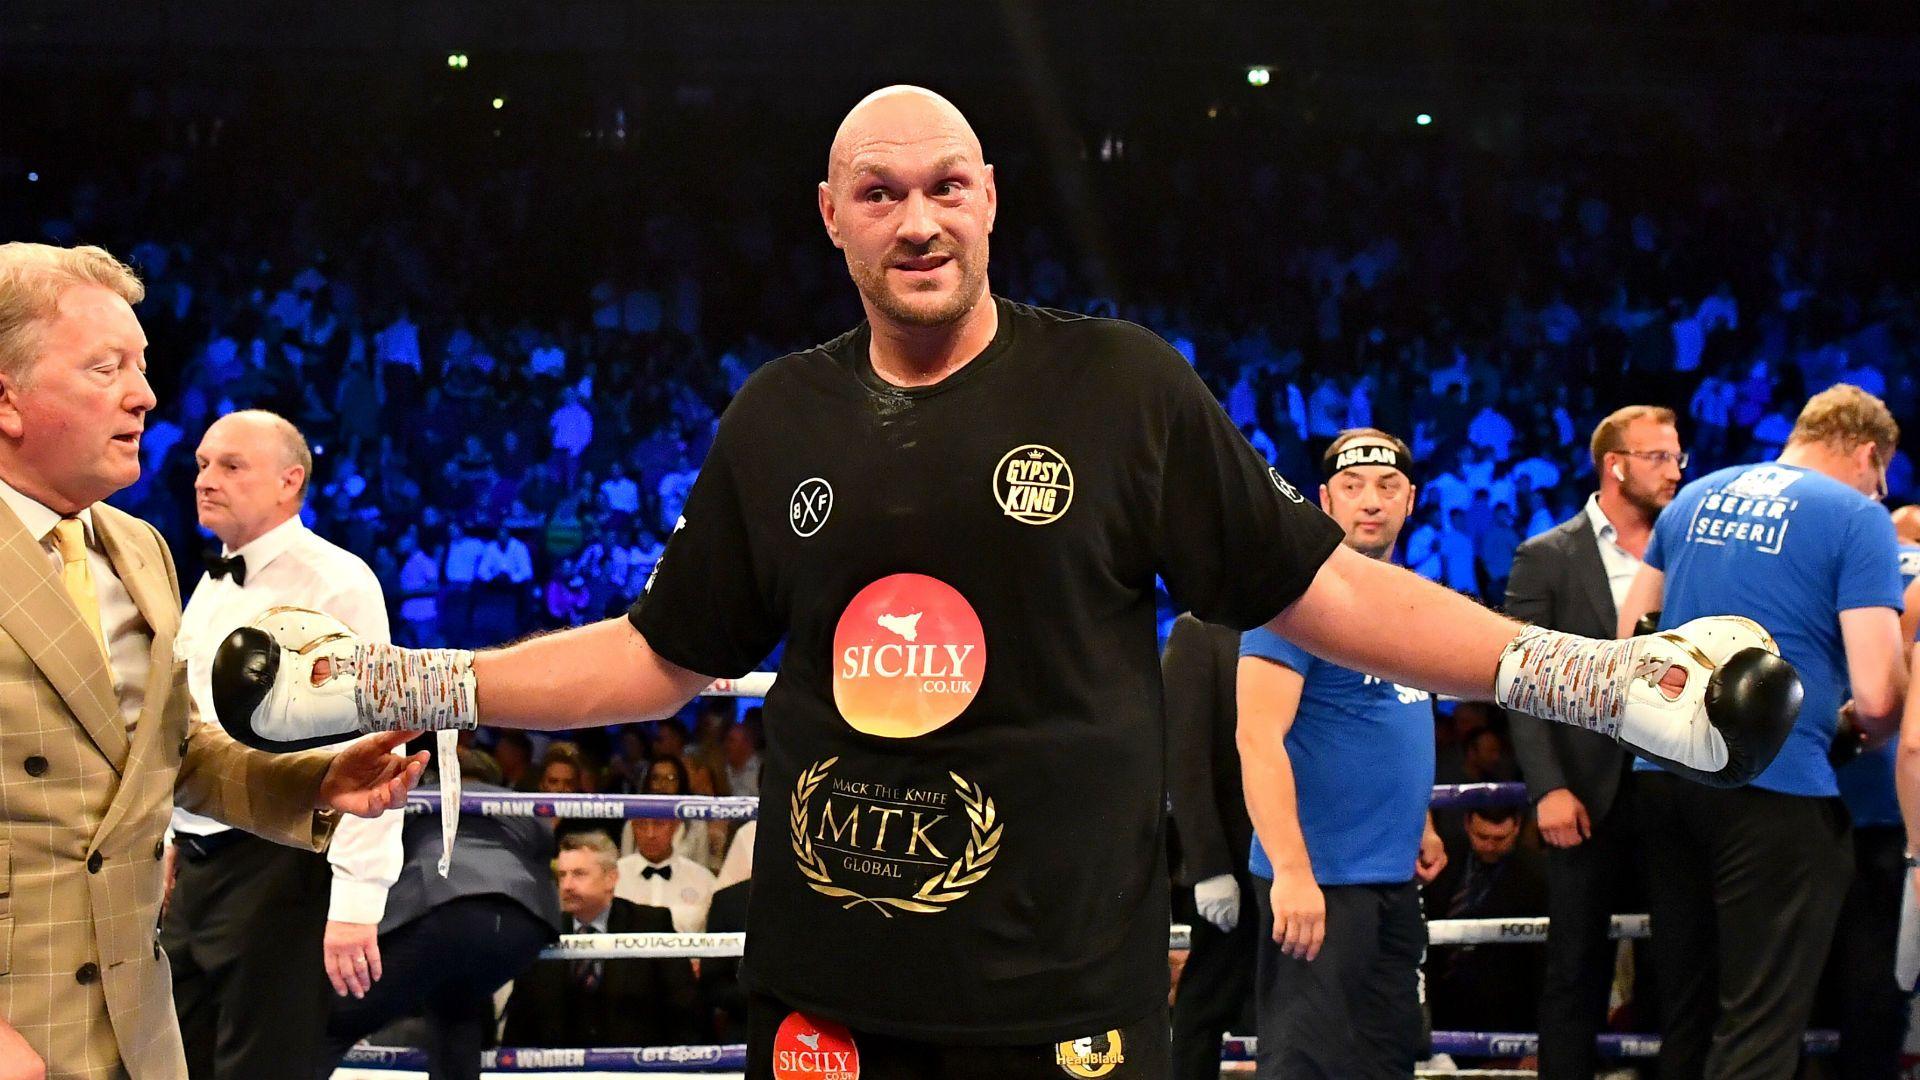 Tyson Fury vs. Deontay Wilder made official after Fury wins